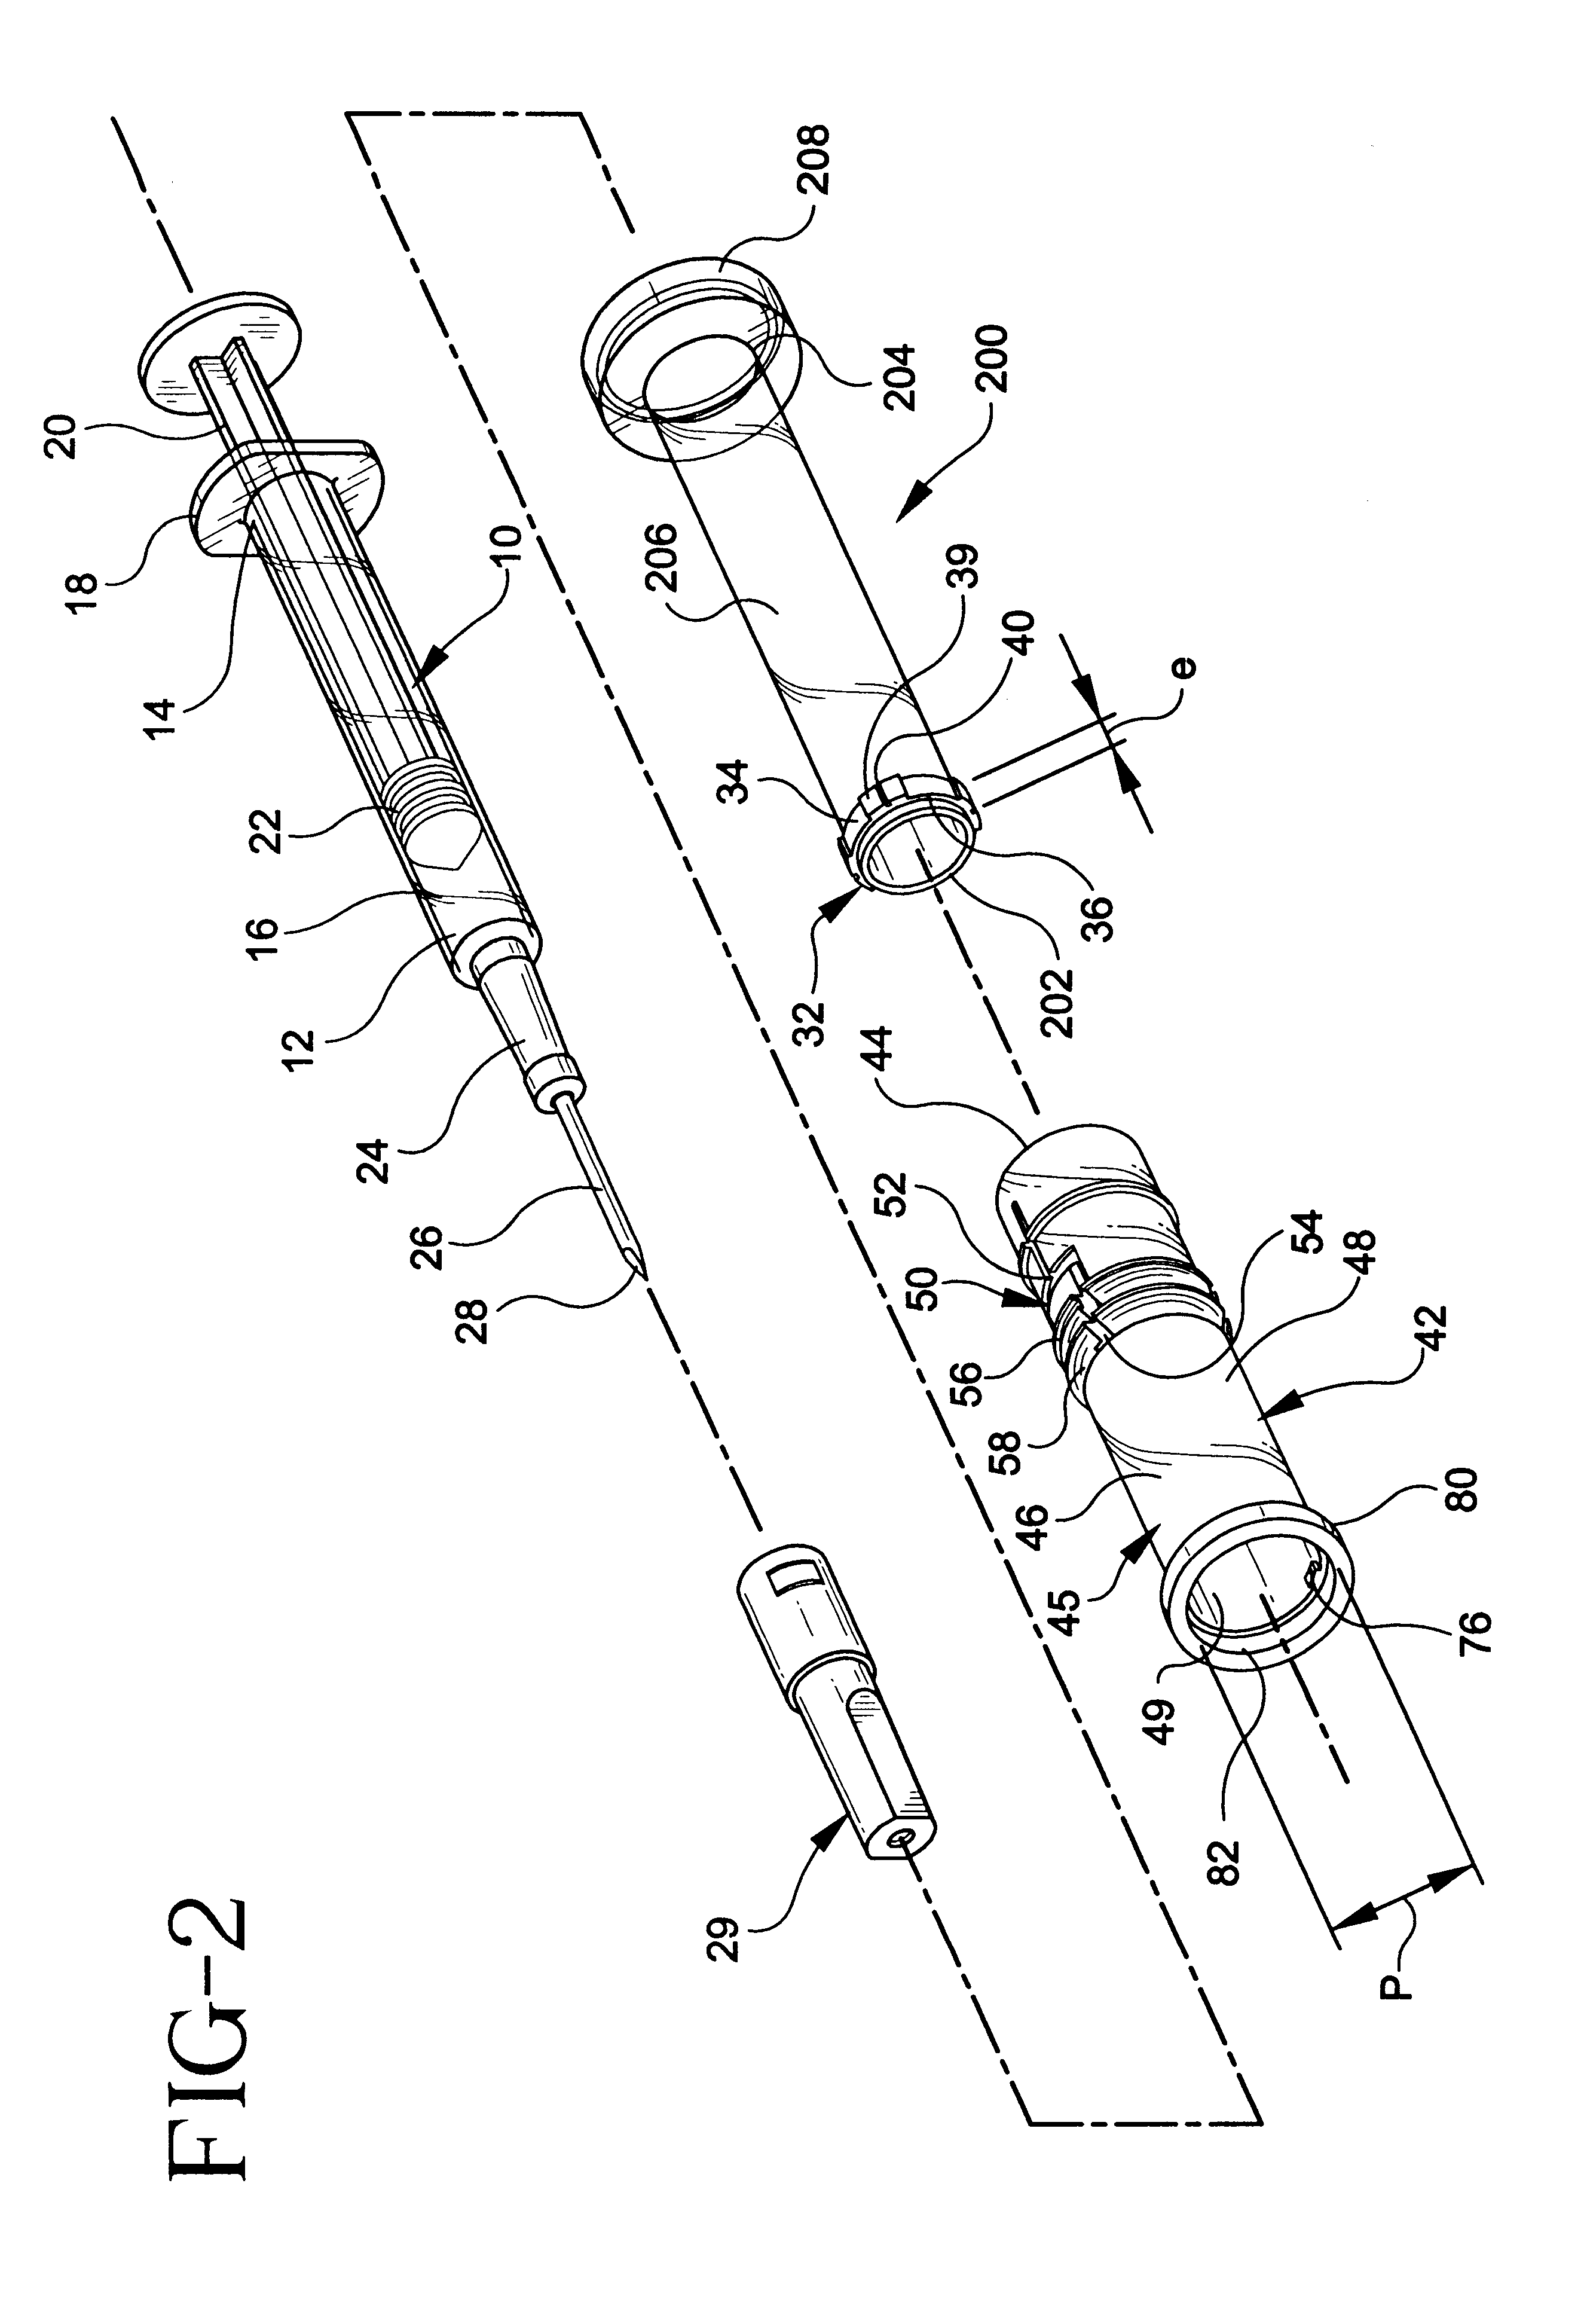 Lockable safety shield assembly for a prefillable syringe